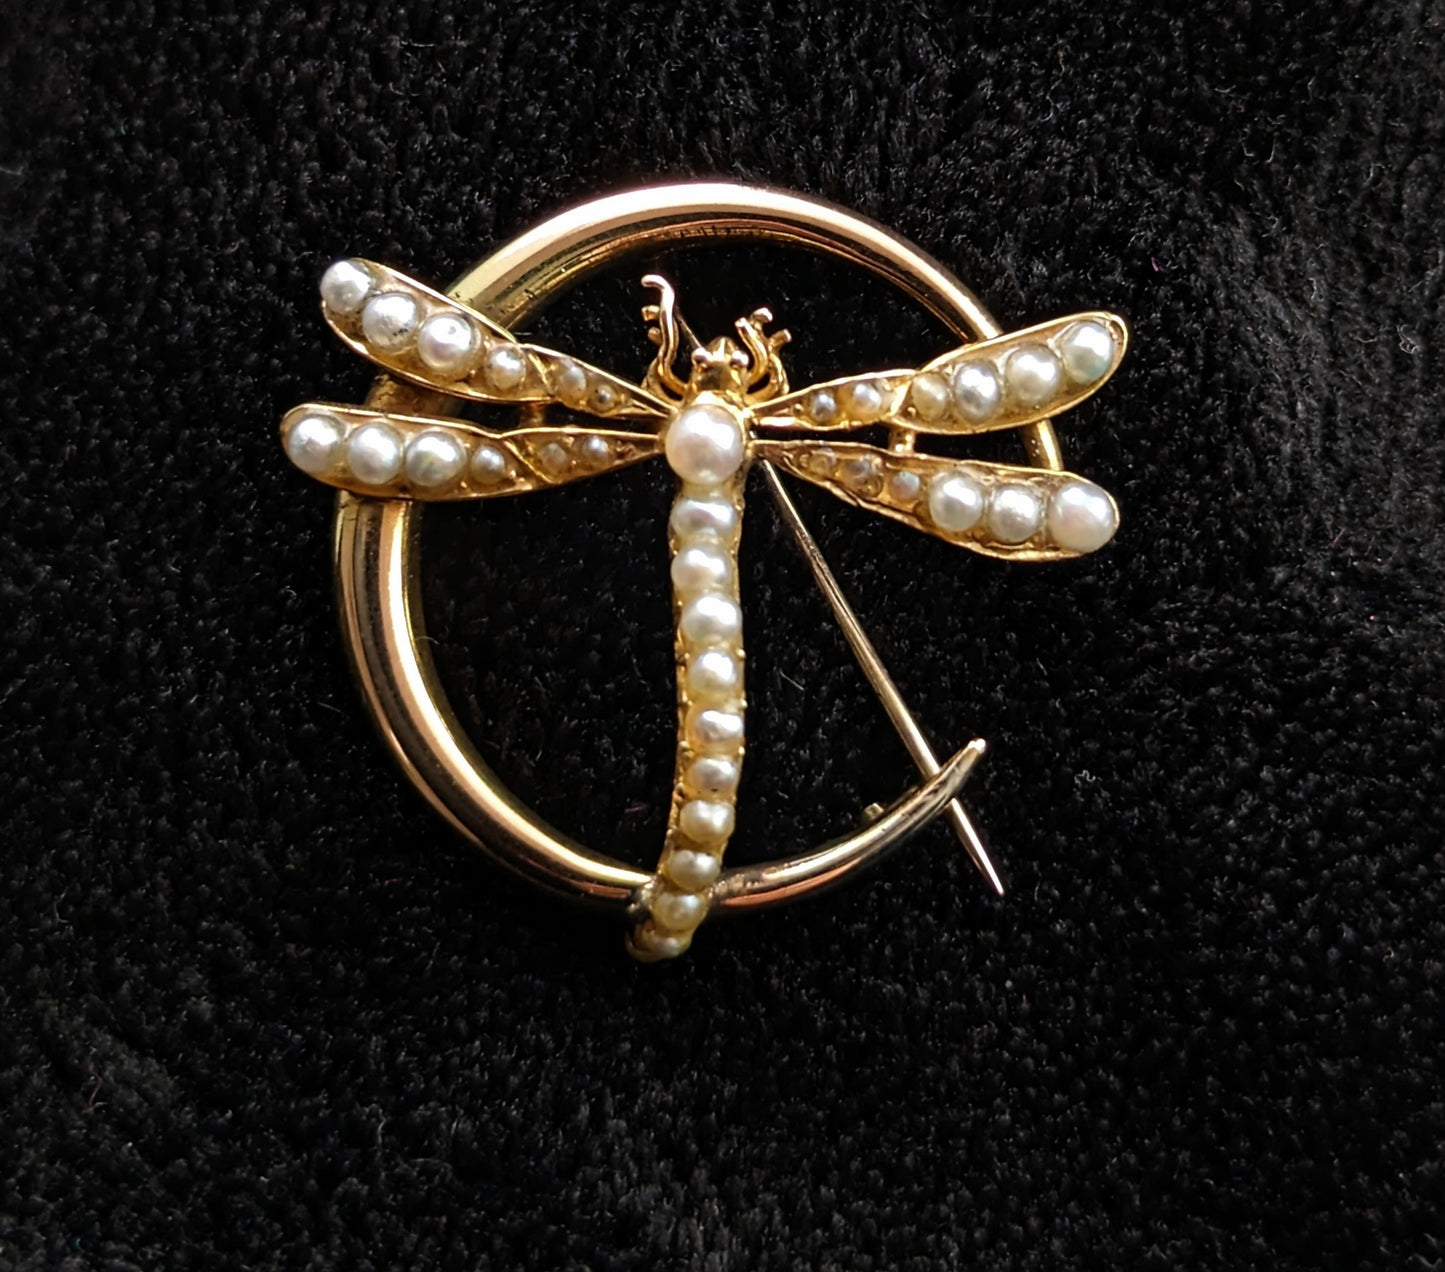 Antique 9ct gold Crescent moon and Dragonfly brooch, Pearl